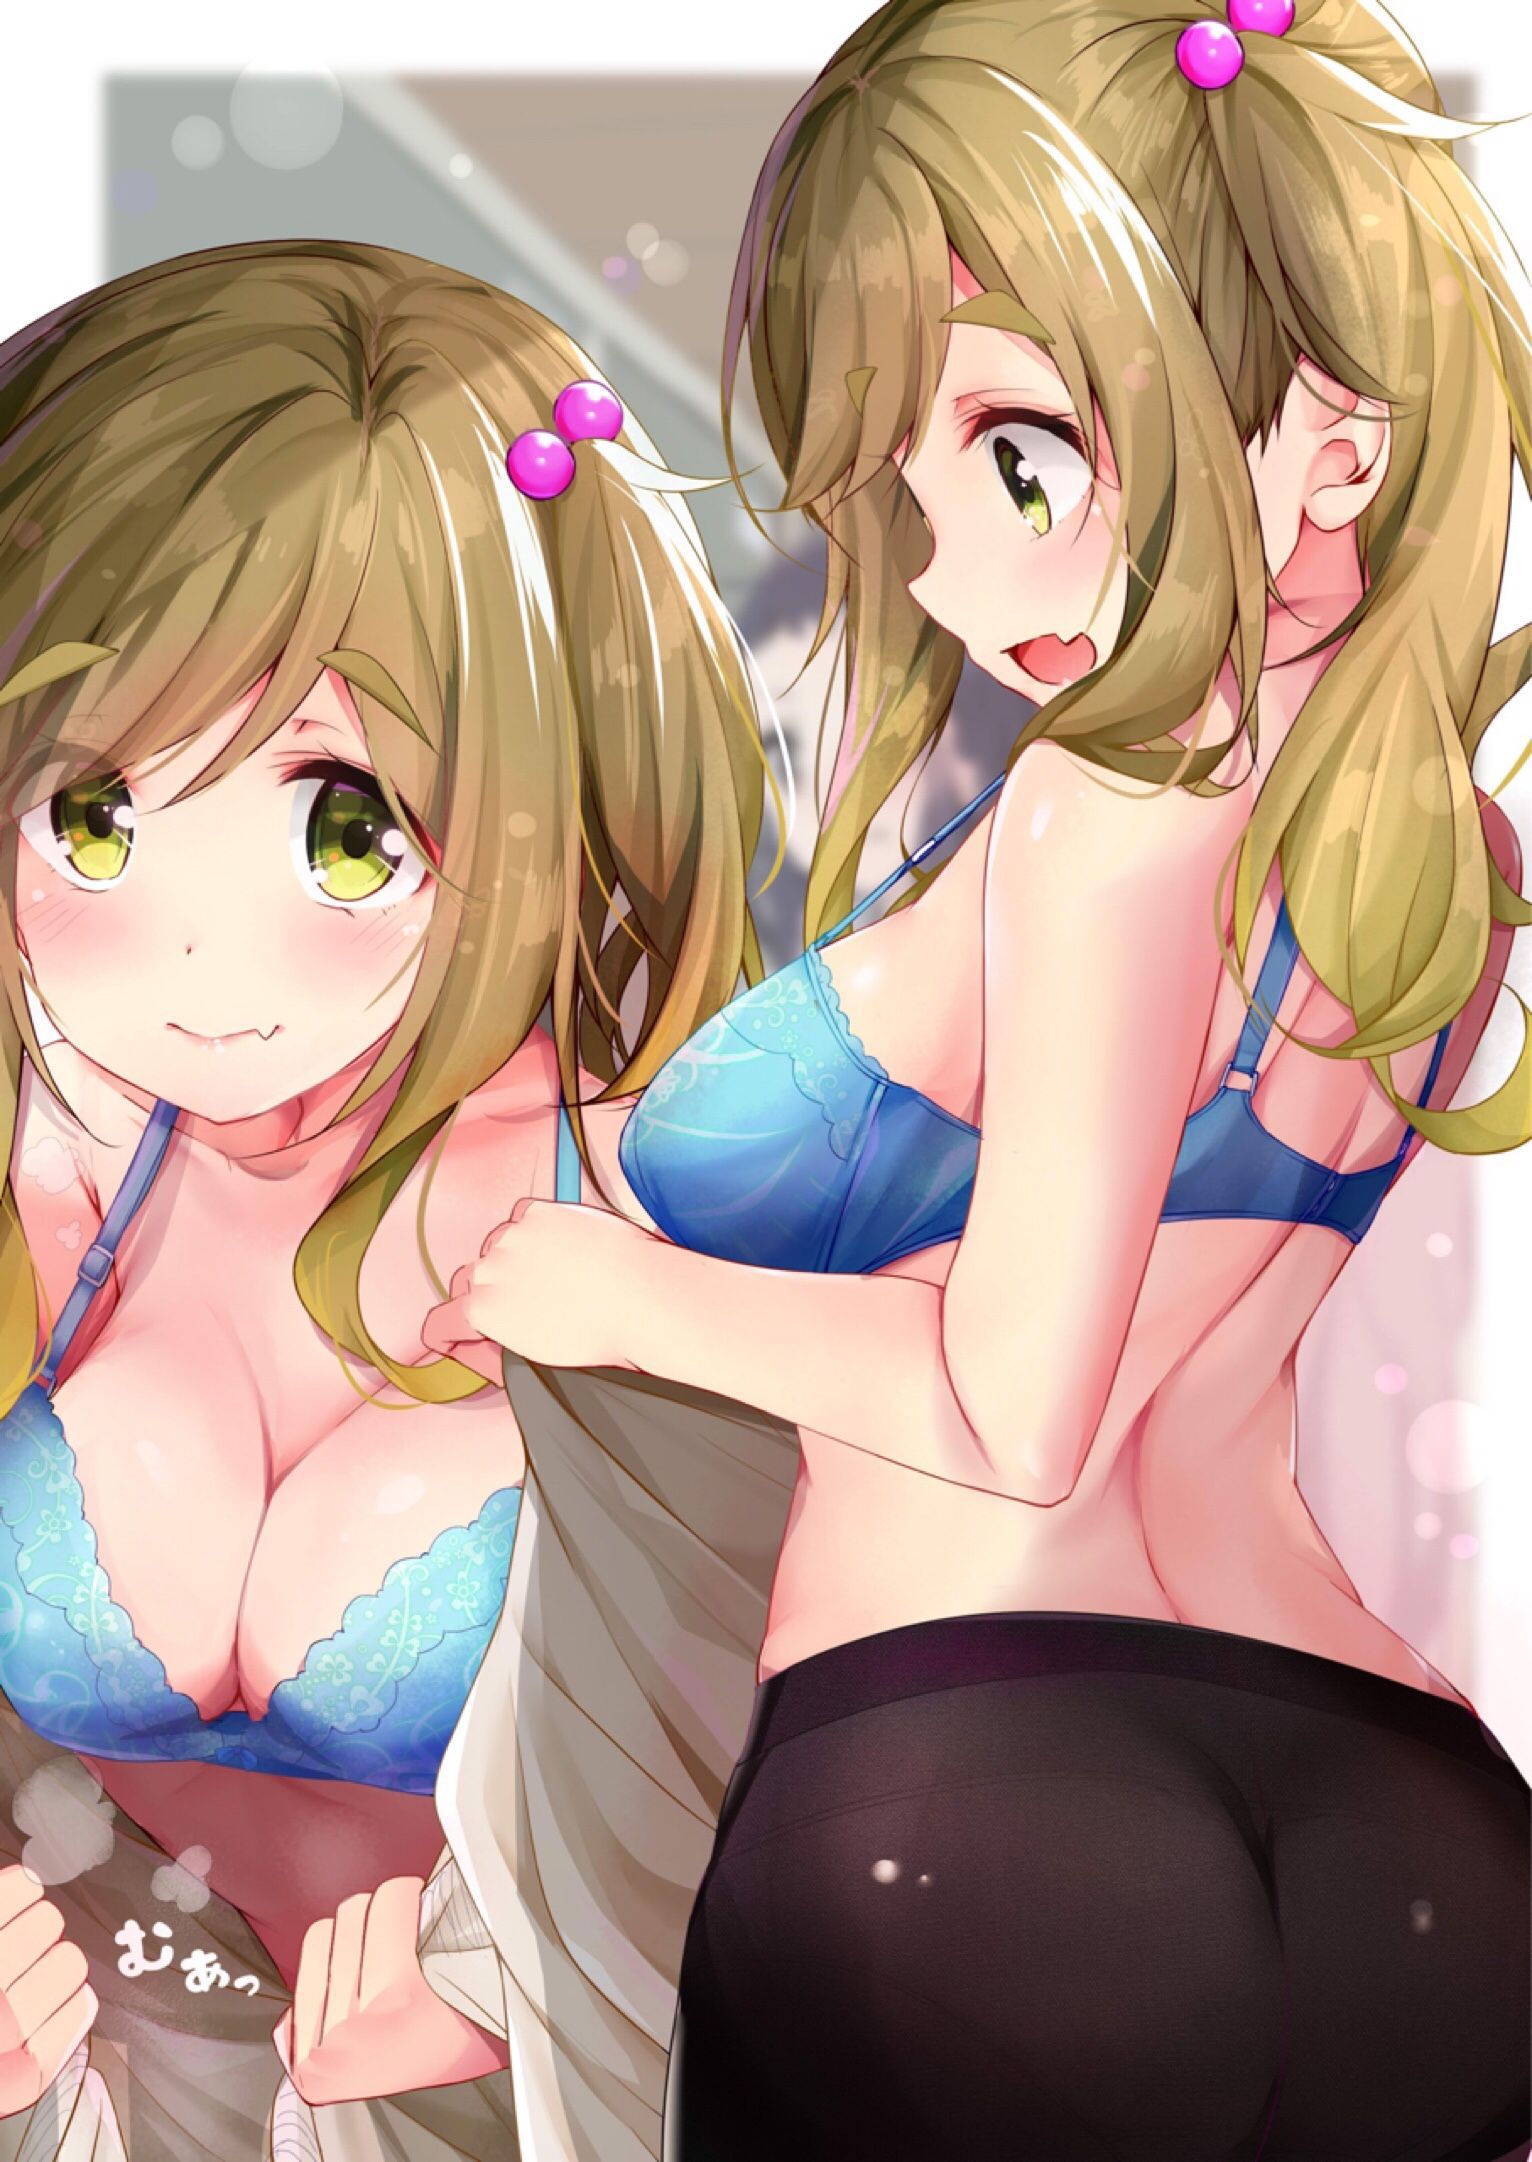 【Secondary erotic】 Here is an erotic image where the girl at the moment of changing clothes can be seen 2